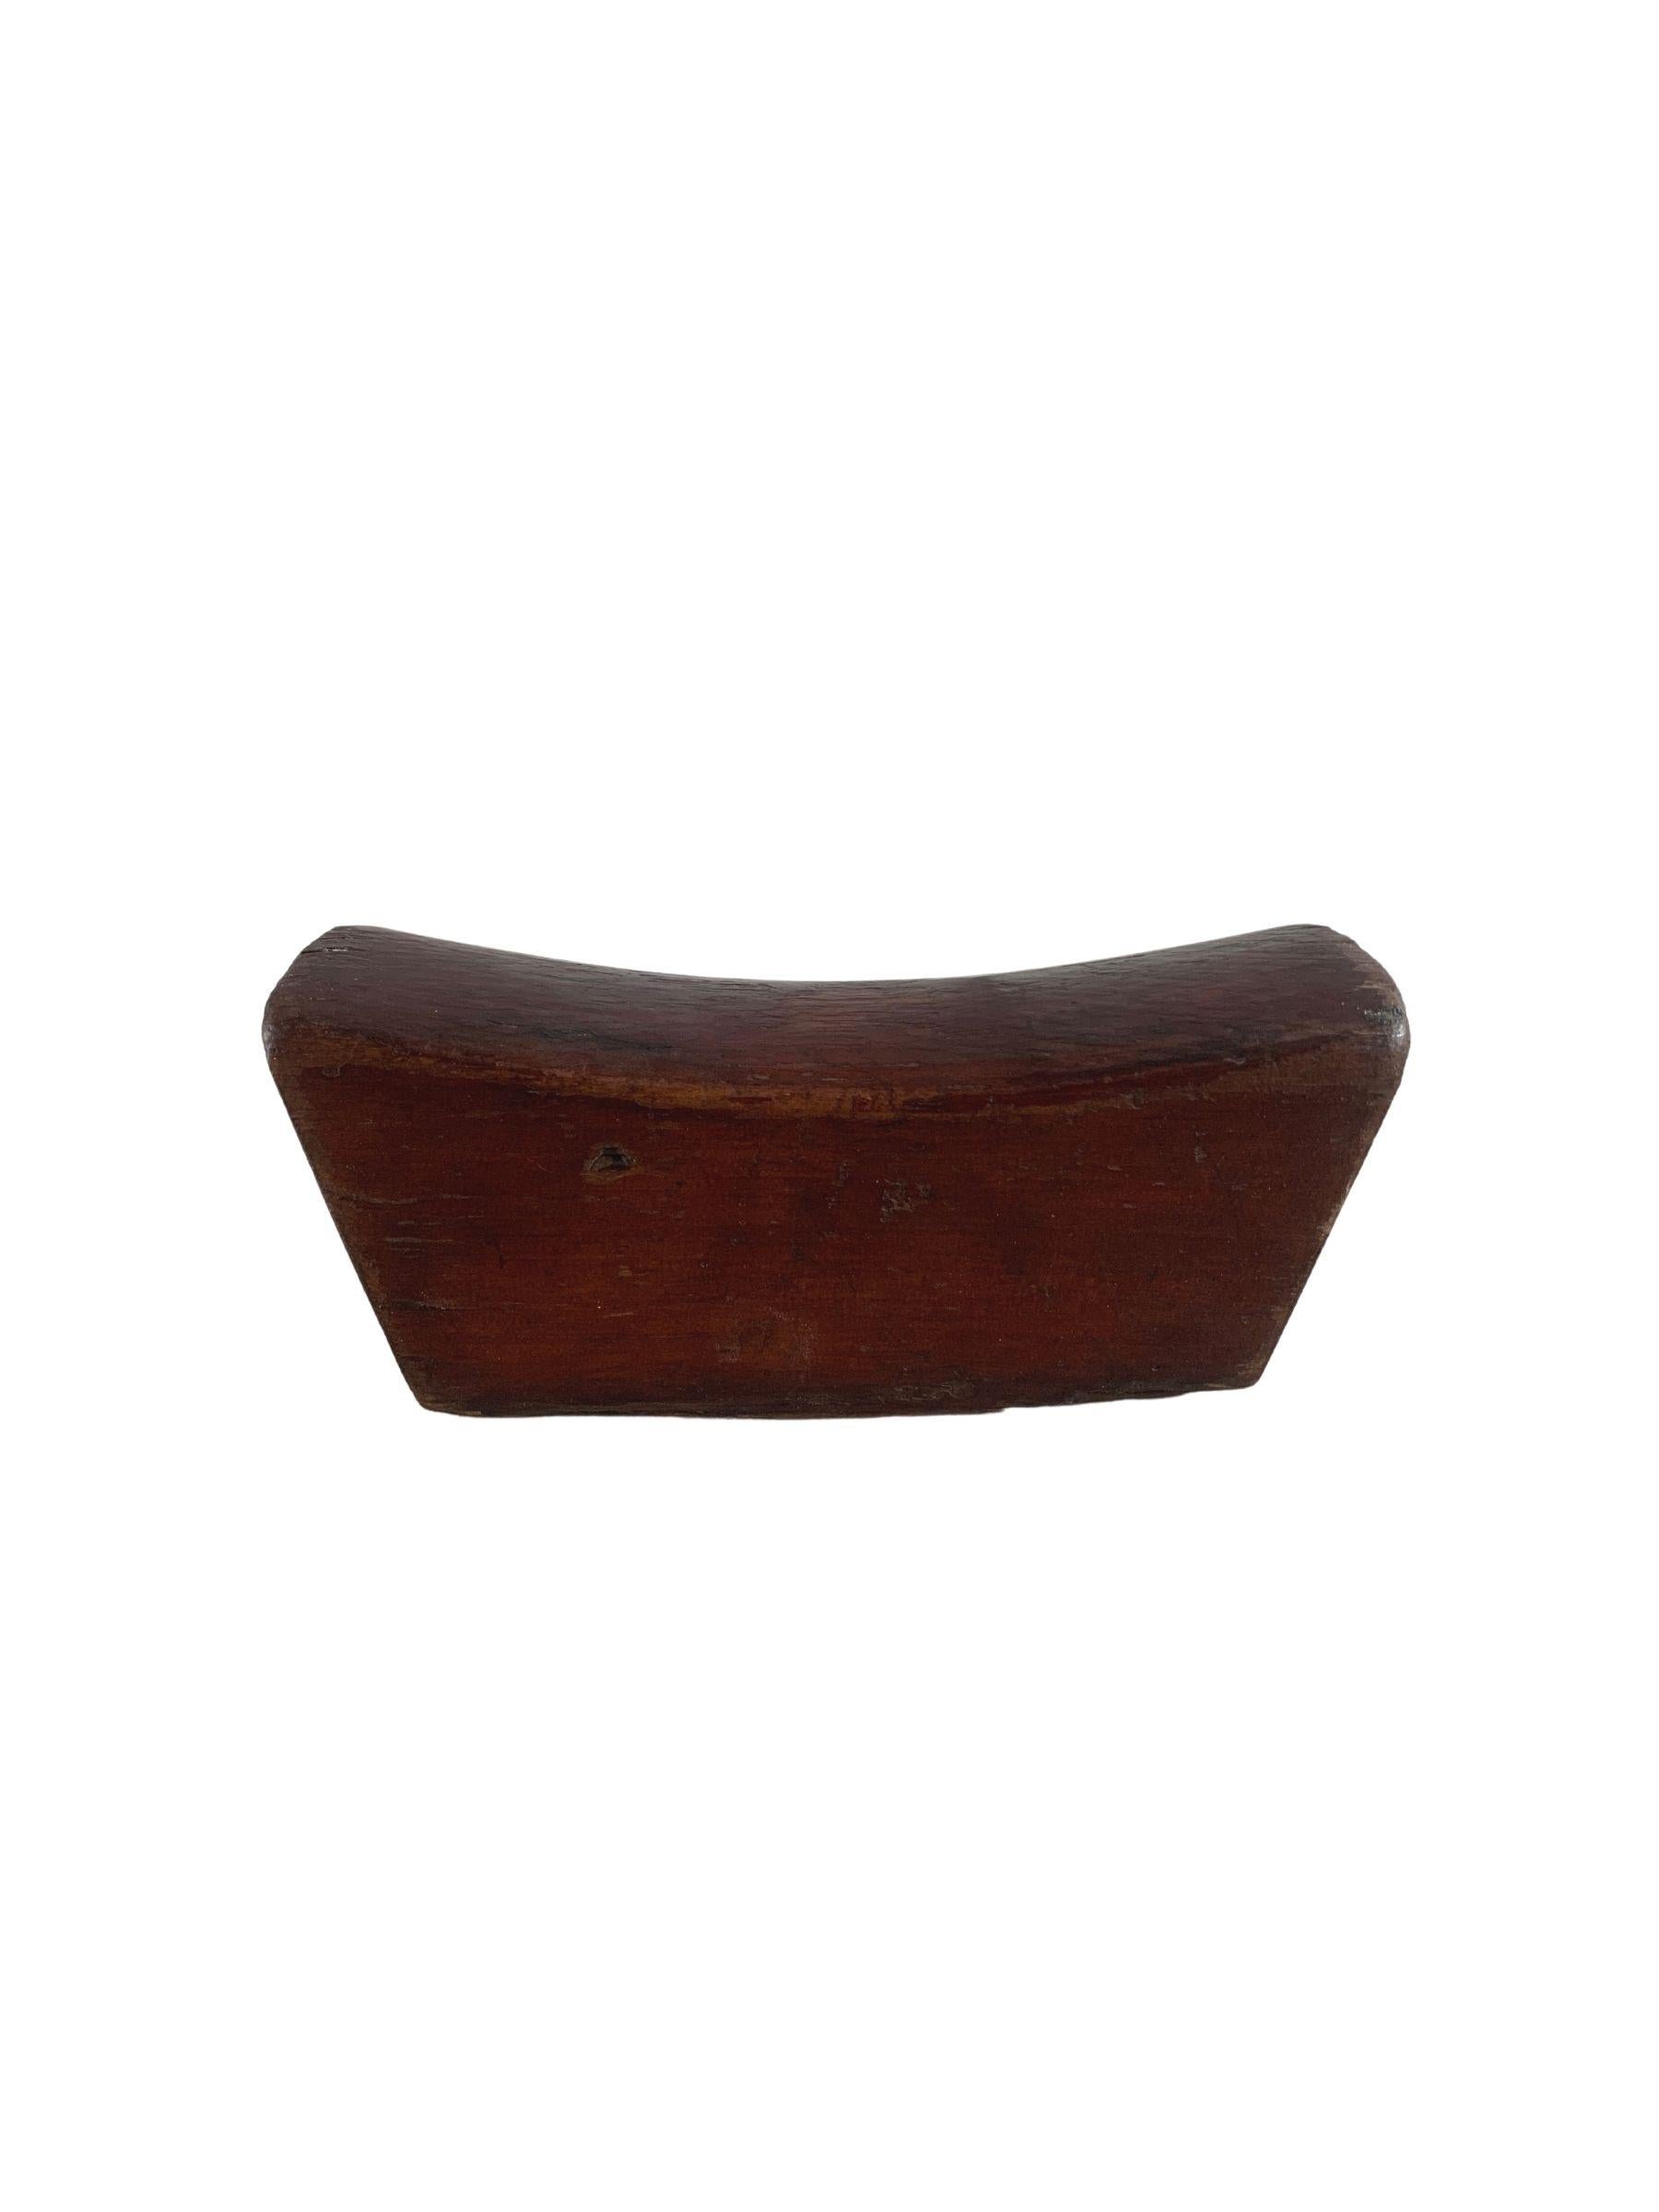 This antique Chinese headrest was crafted from elmwood and has a wonderfully smooth texture and elongated shape. It likely belonged to an upper-class individual to support their head. This piece has a lovely wood texture. 
 